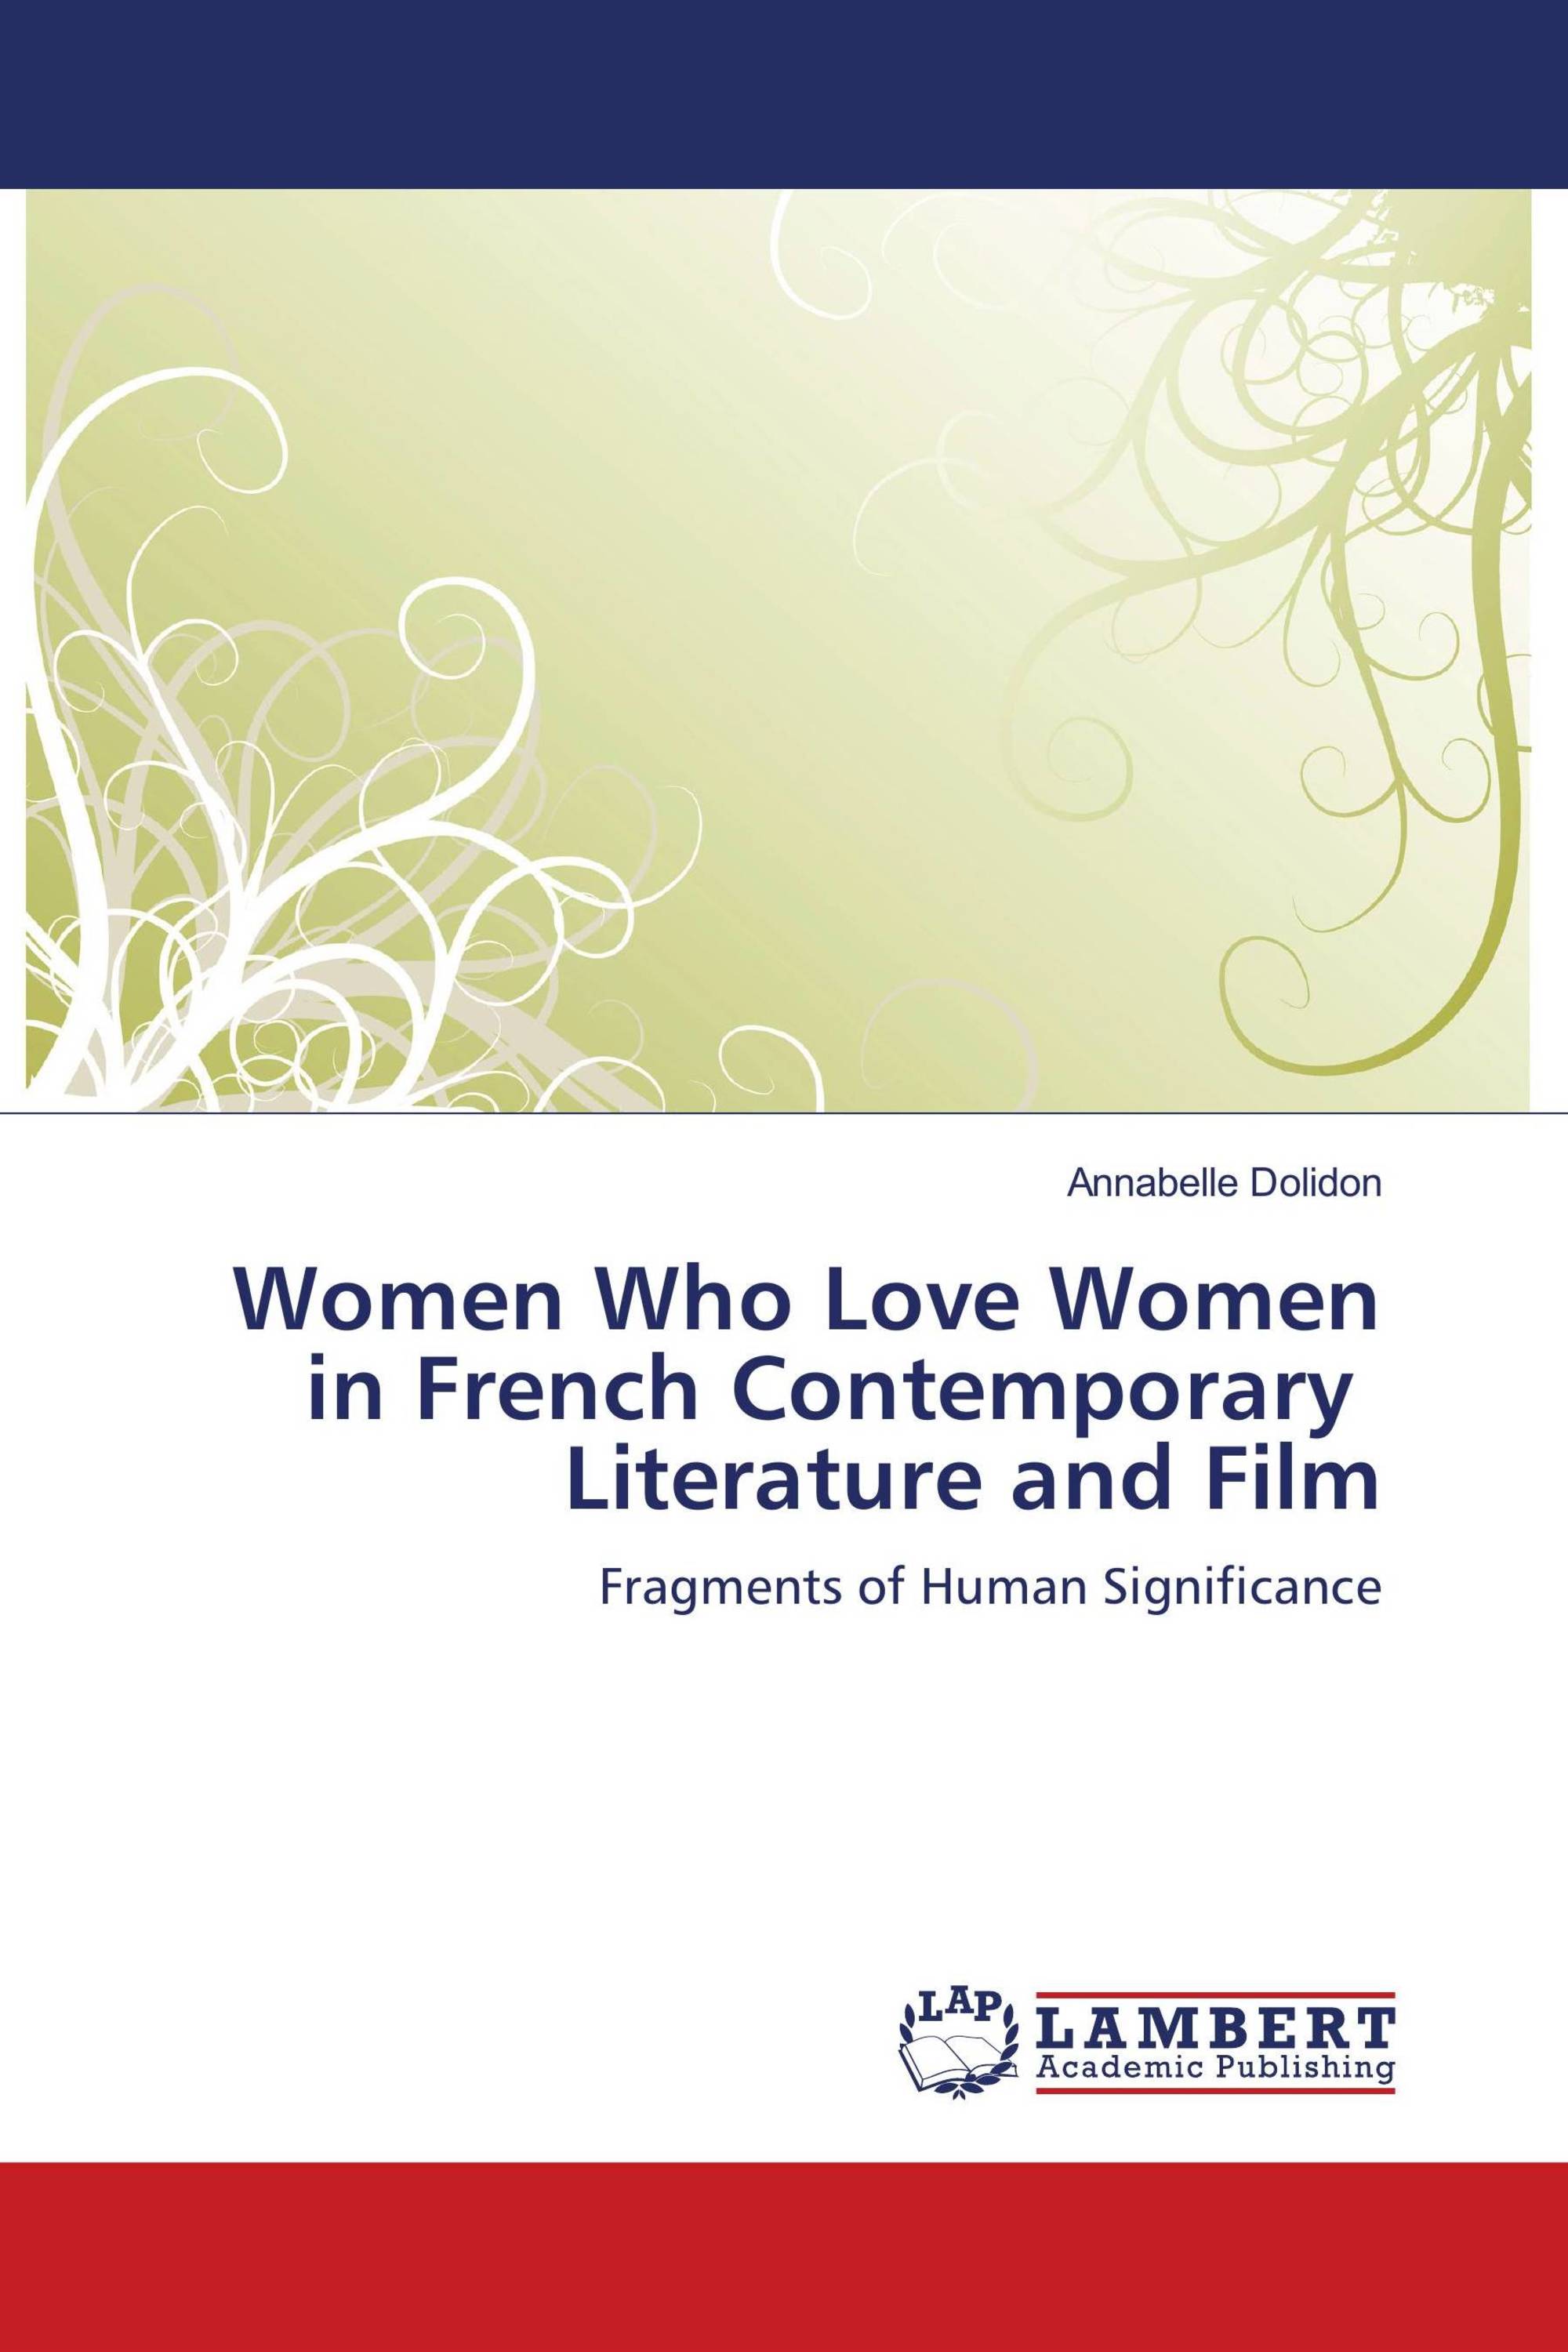 Women Who Love Women in French Contemporary Literature and Film